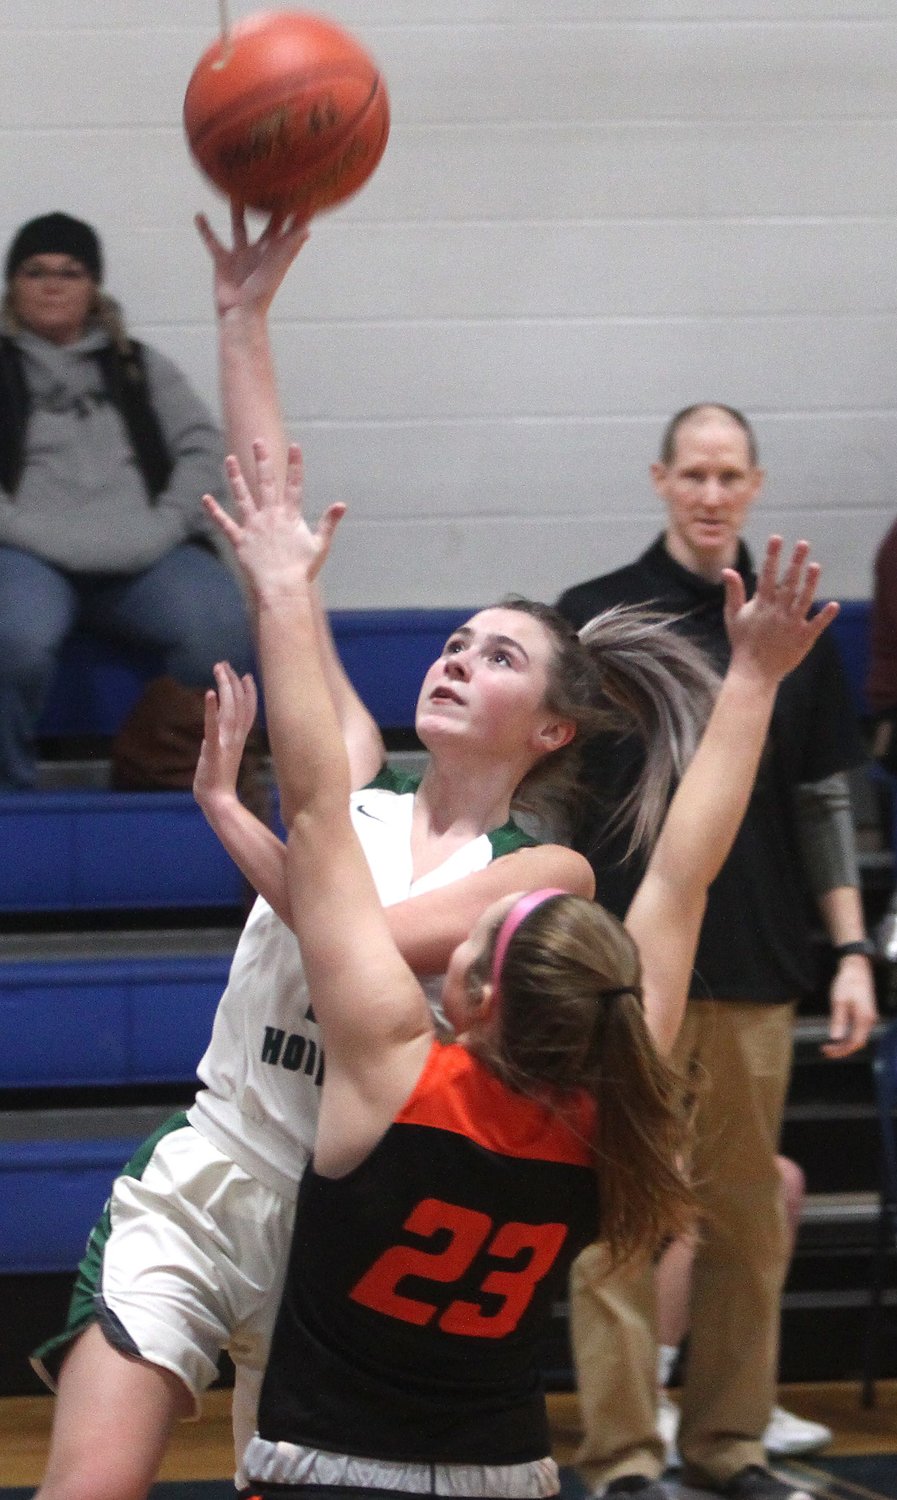 Westran sophomore Kenzie Black scored her team's first field goal Thursday with this transition layup at 5:58 in the second quarter to cut the Lady Hornets deficit to 20-8. Westran girls lost its consolation game of the Sturgeon Invitational to New Bloomfield by a 60-50 result.